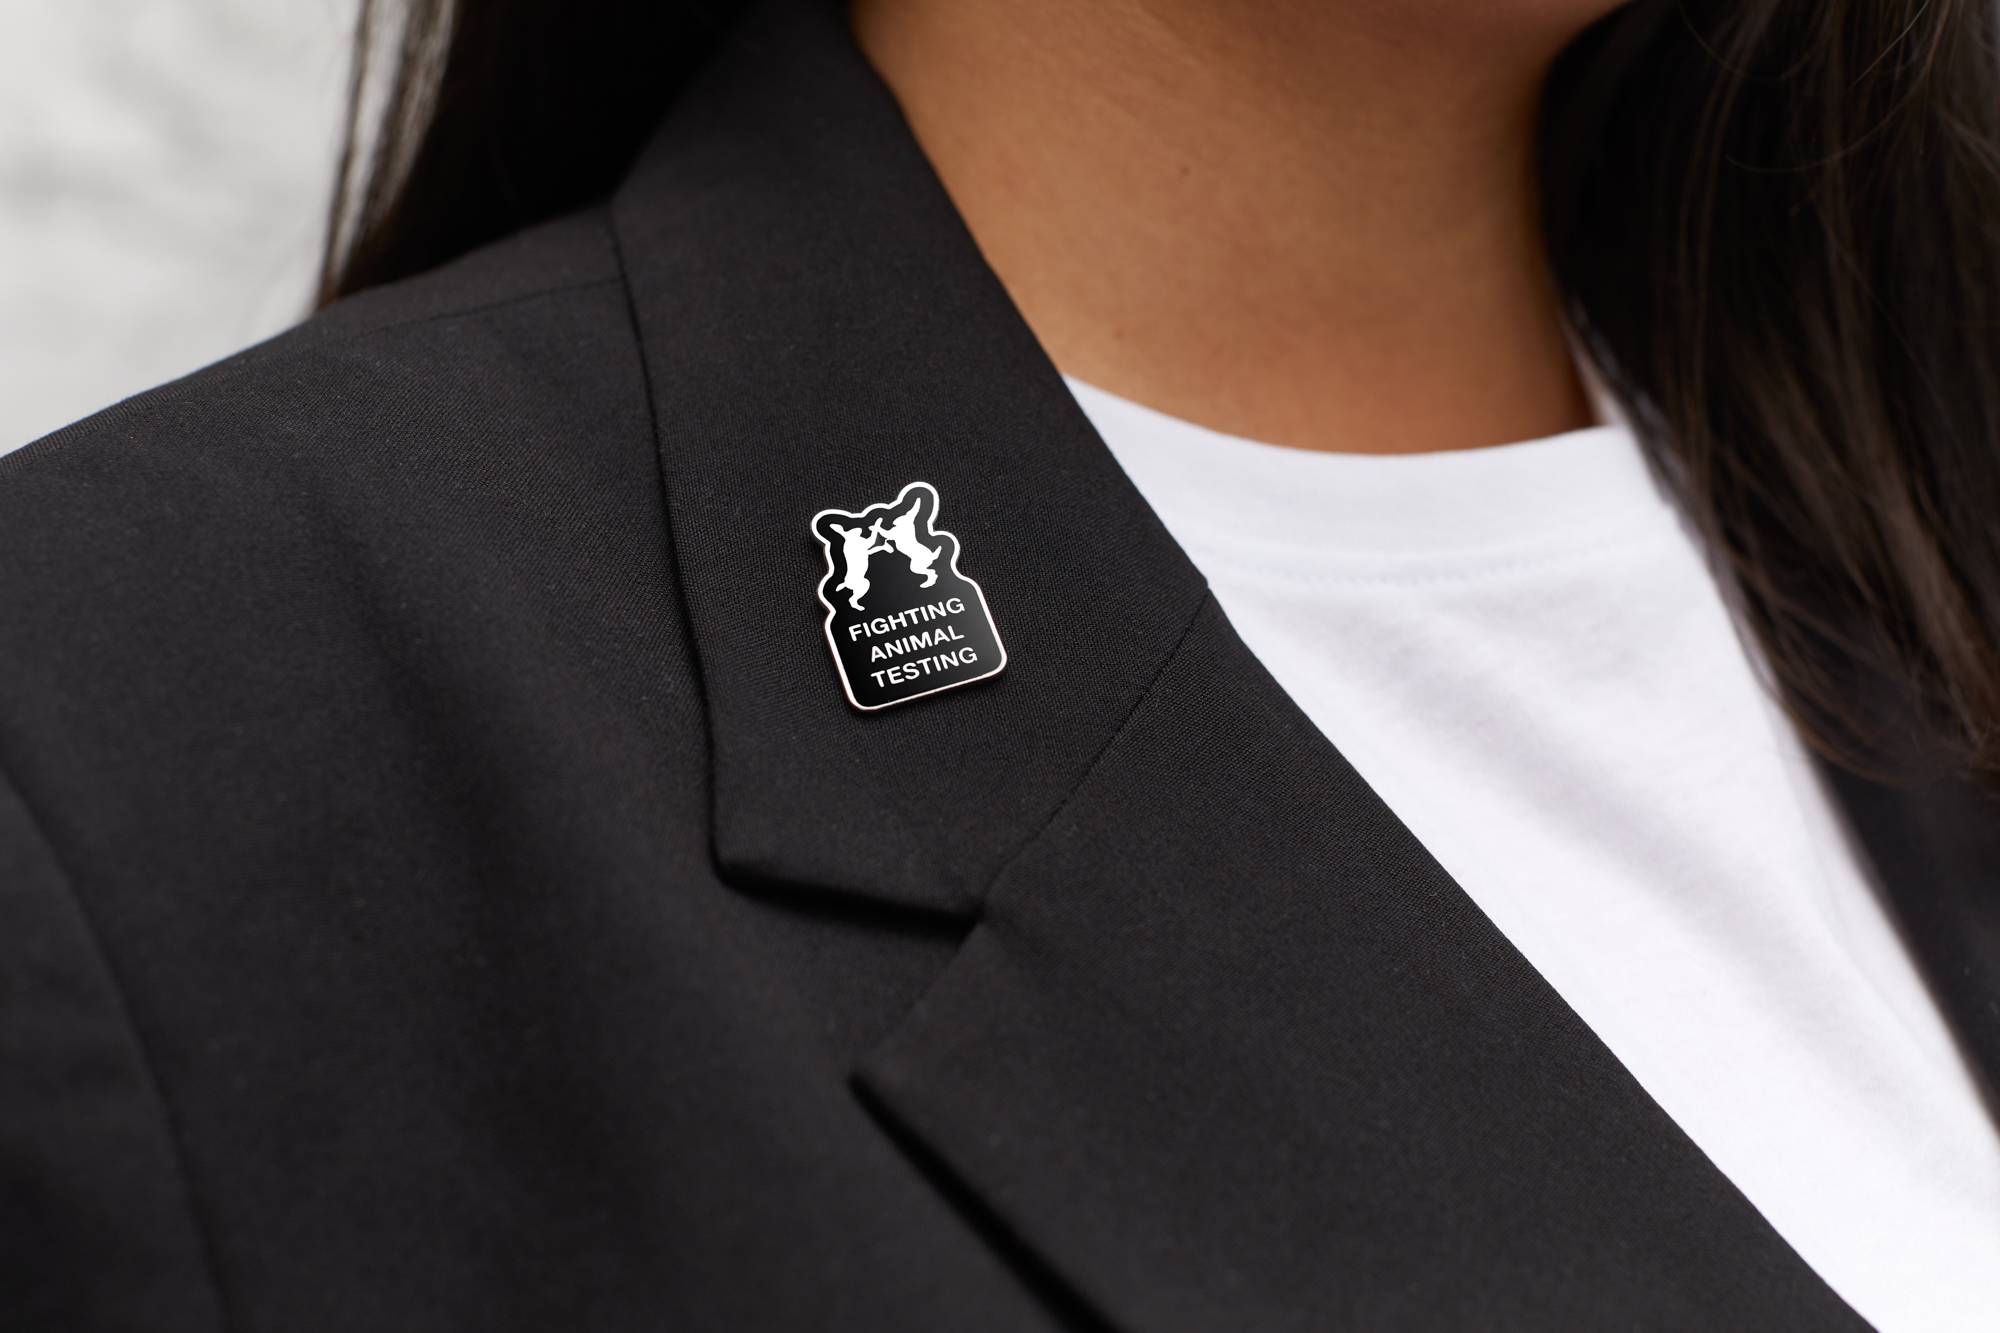 Image is a close-up of the model wearing a black blazer with the Fighting Animal Testing pin badge secured to the lapel.